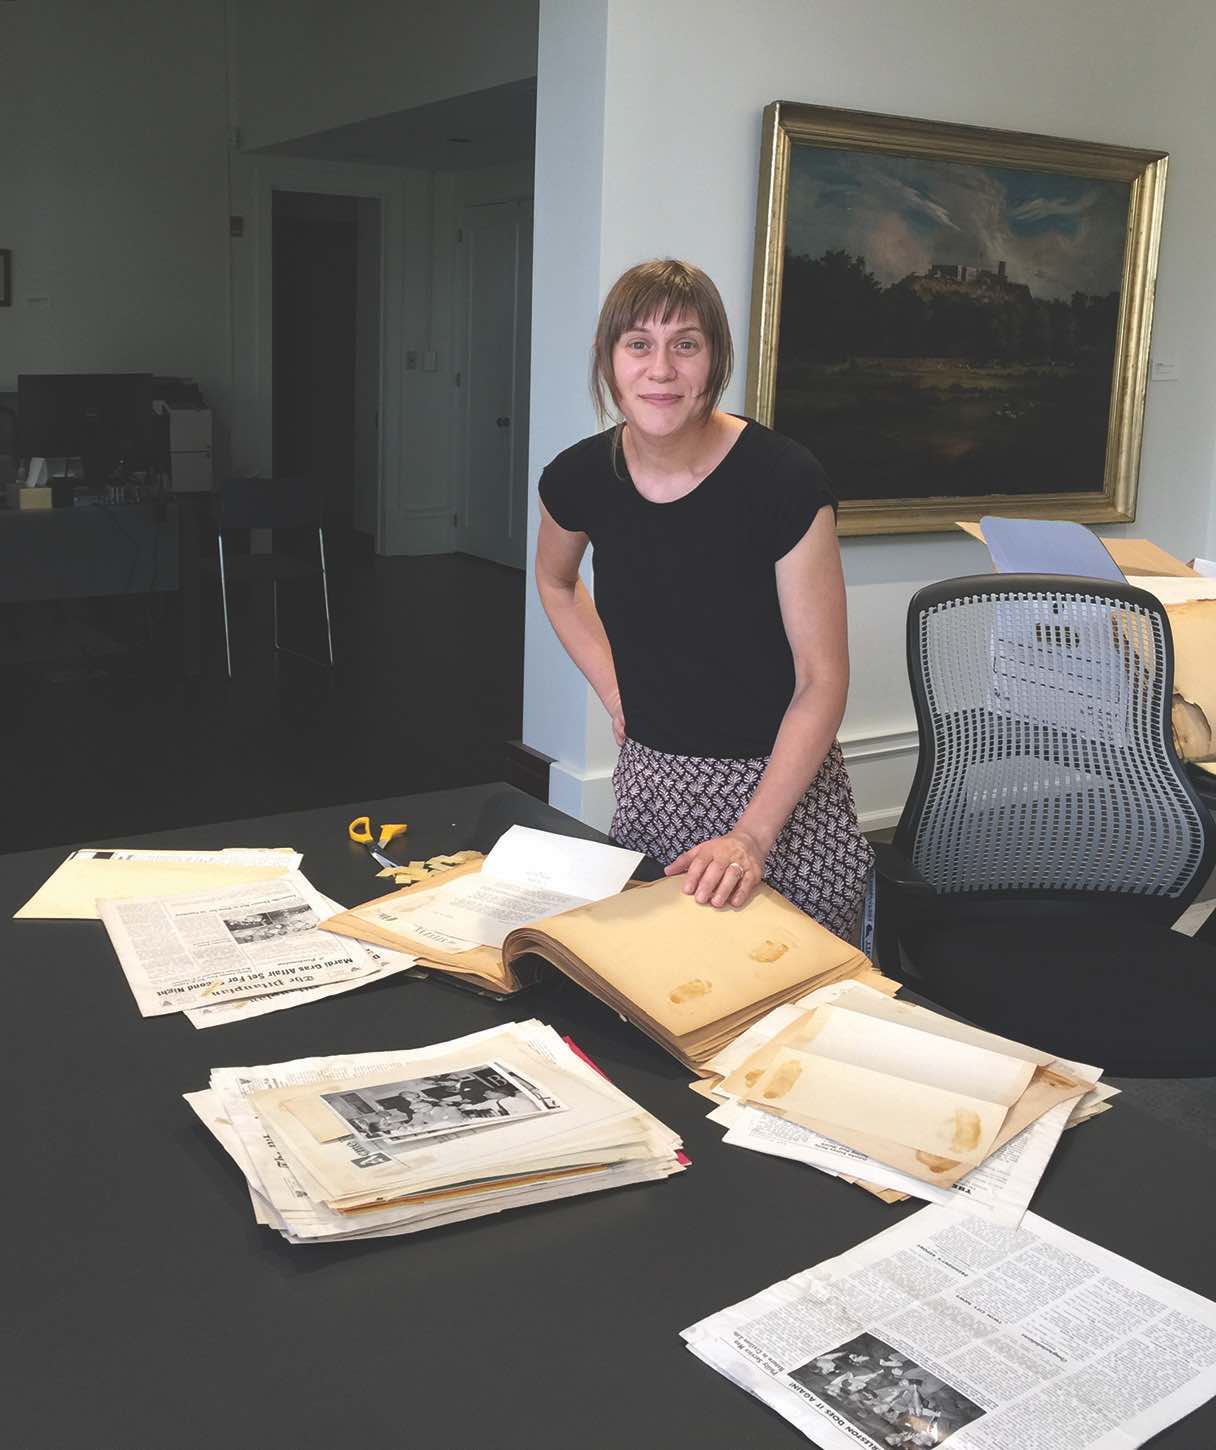 Dr. Abigail Glogower wears a black shirt and gray pants. She is standing by a black table with old documents on it. There is a landscape painting in the background.